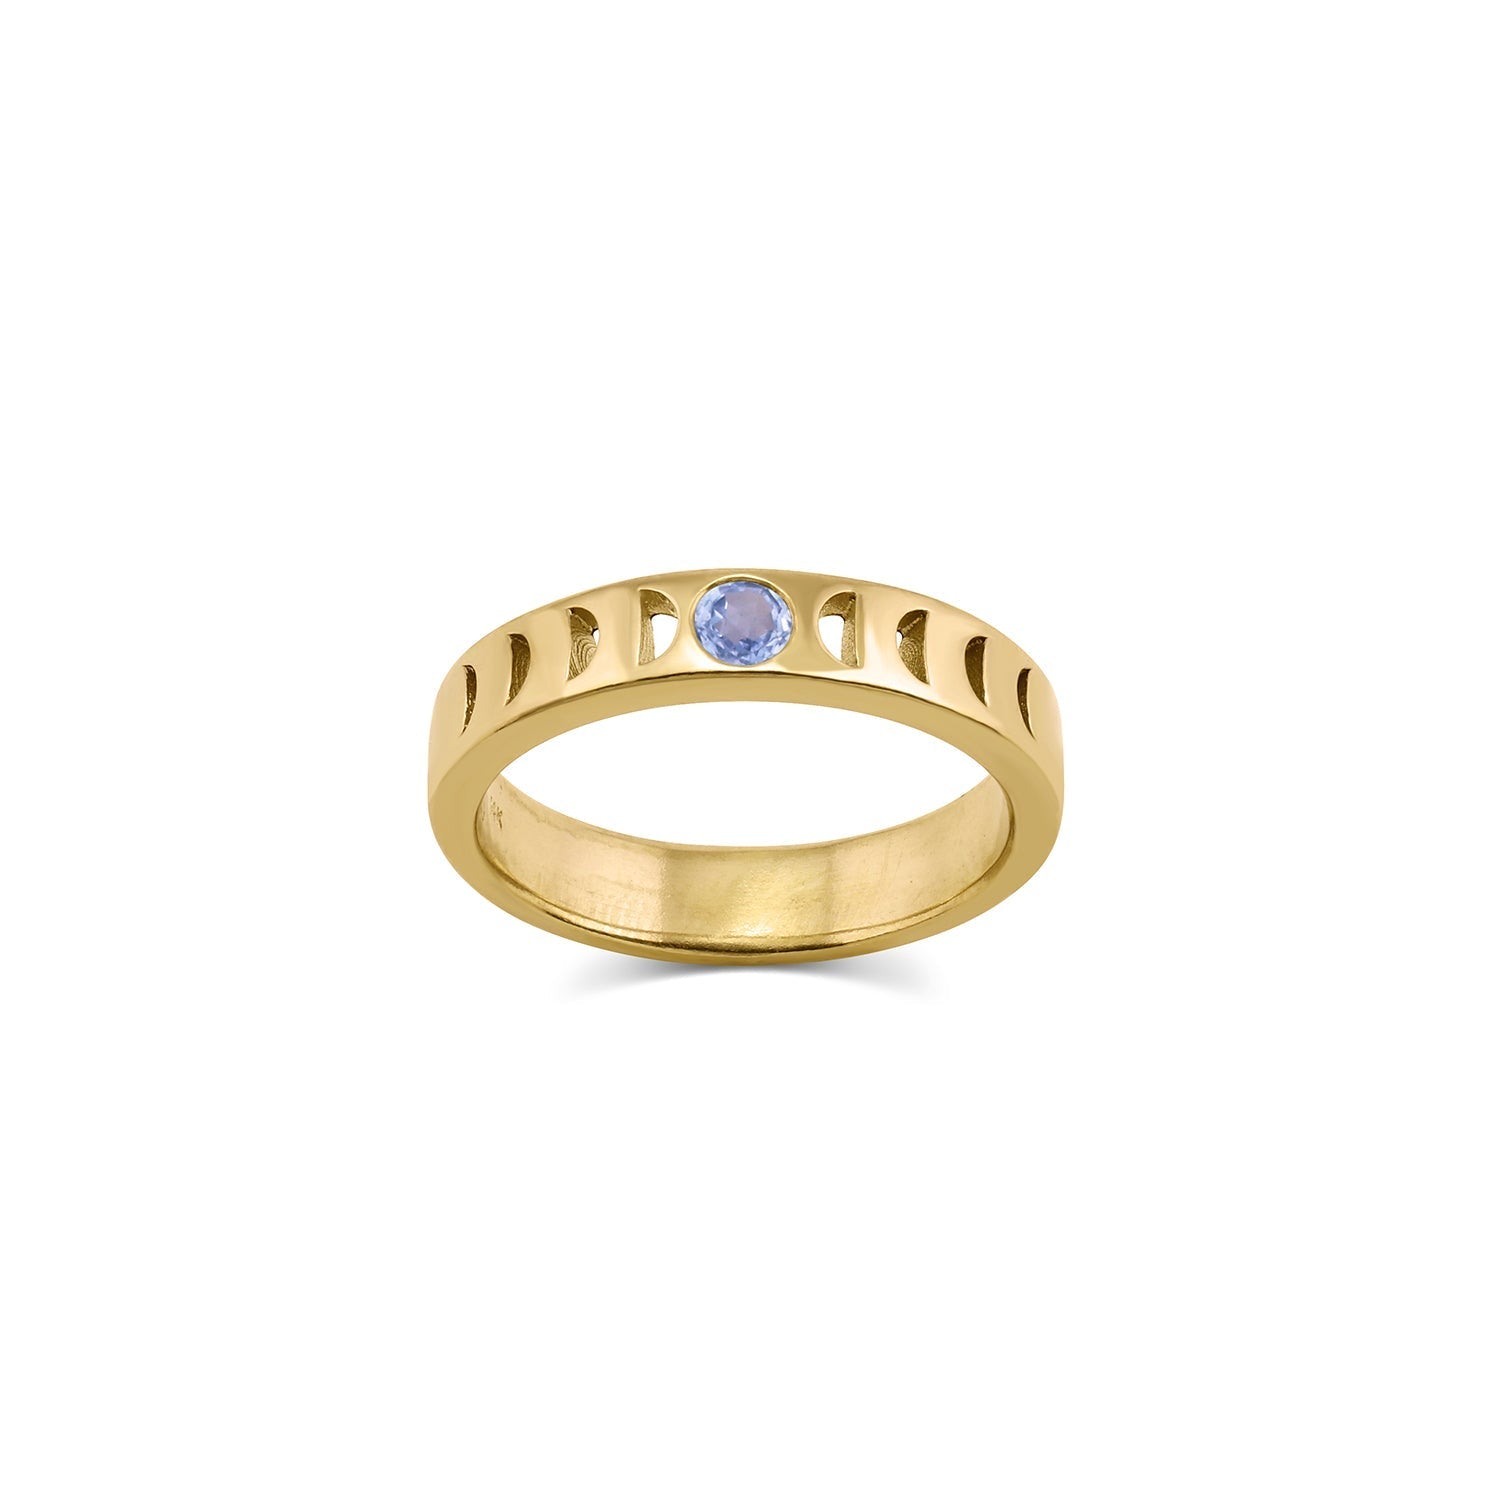 Moon Phase Engagement Ring | 4mm wide band | 18k gold